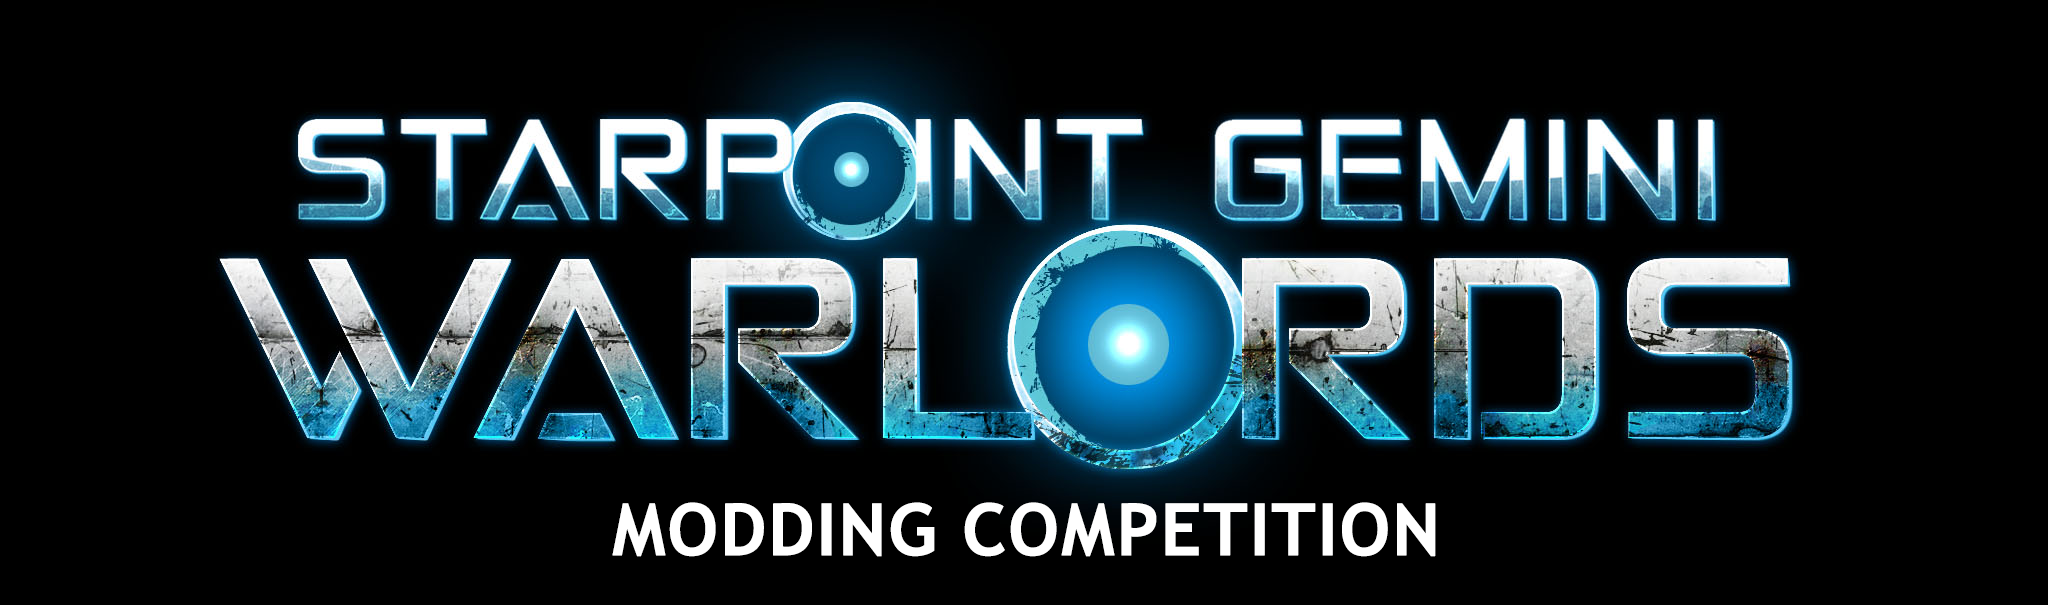 Starpoint Gemini Warlords modding competition